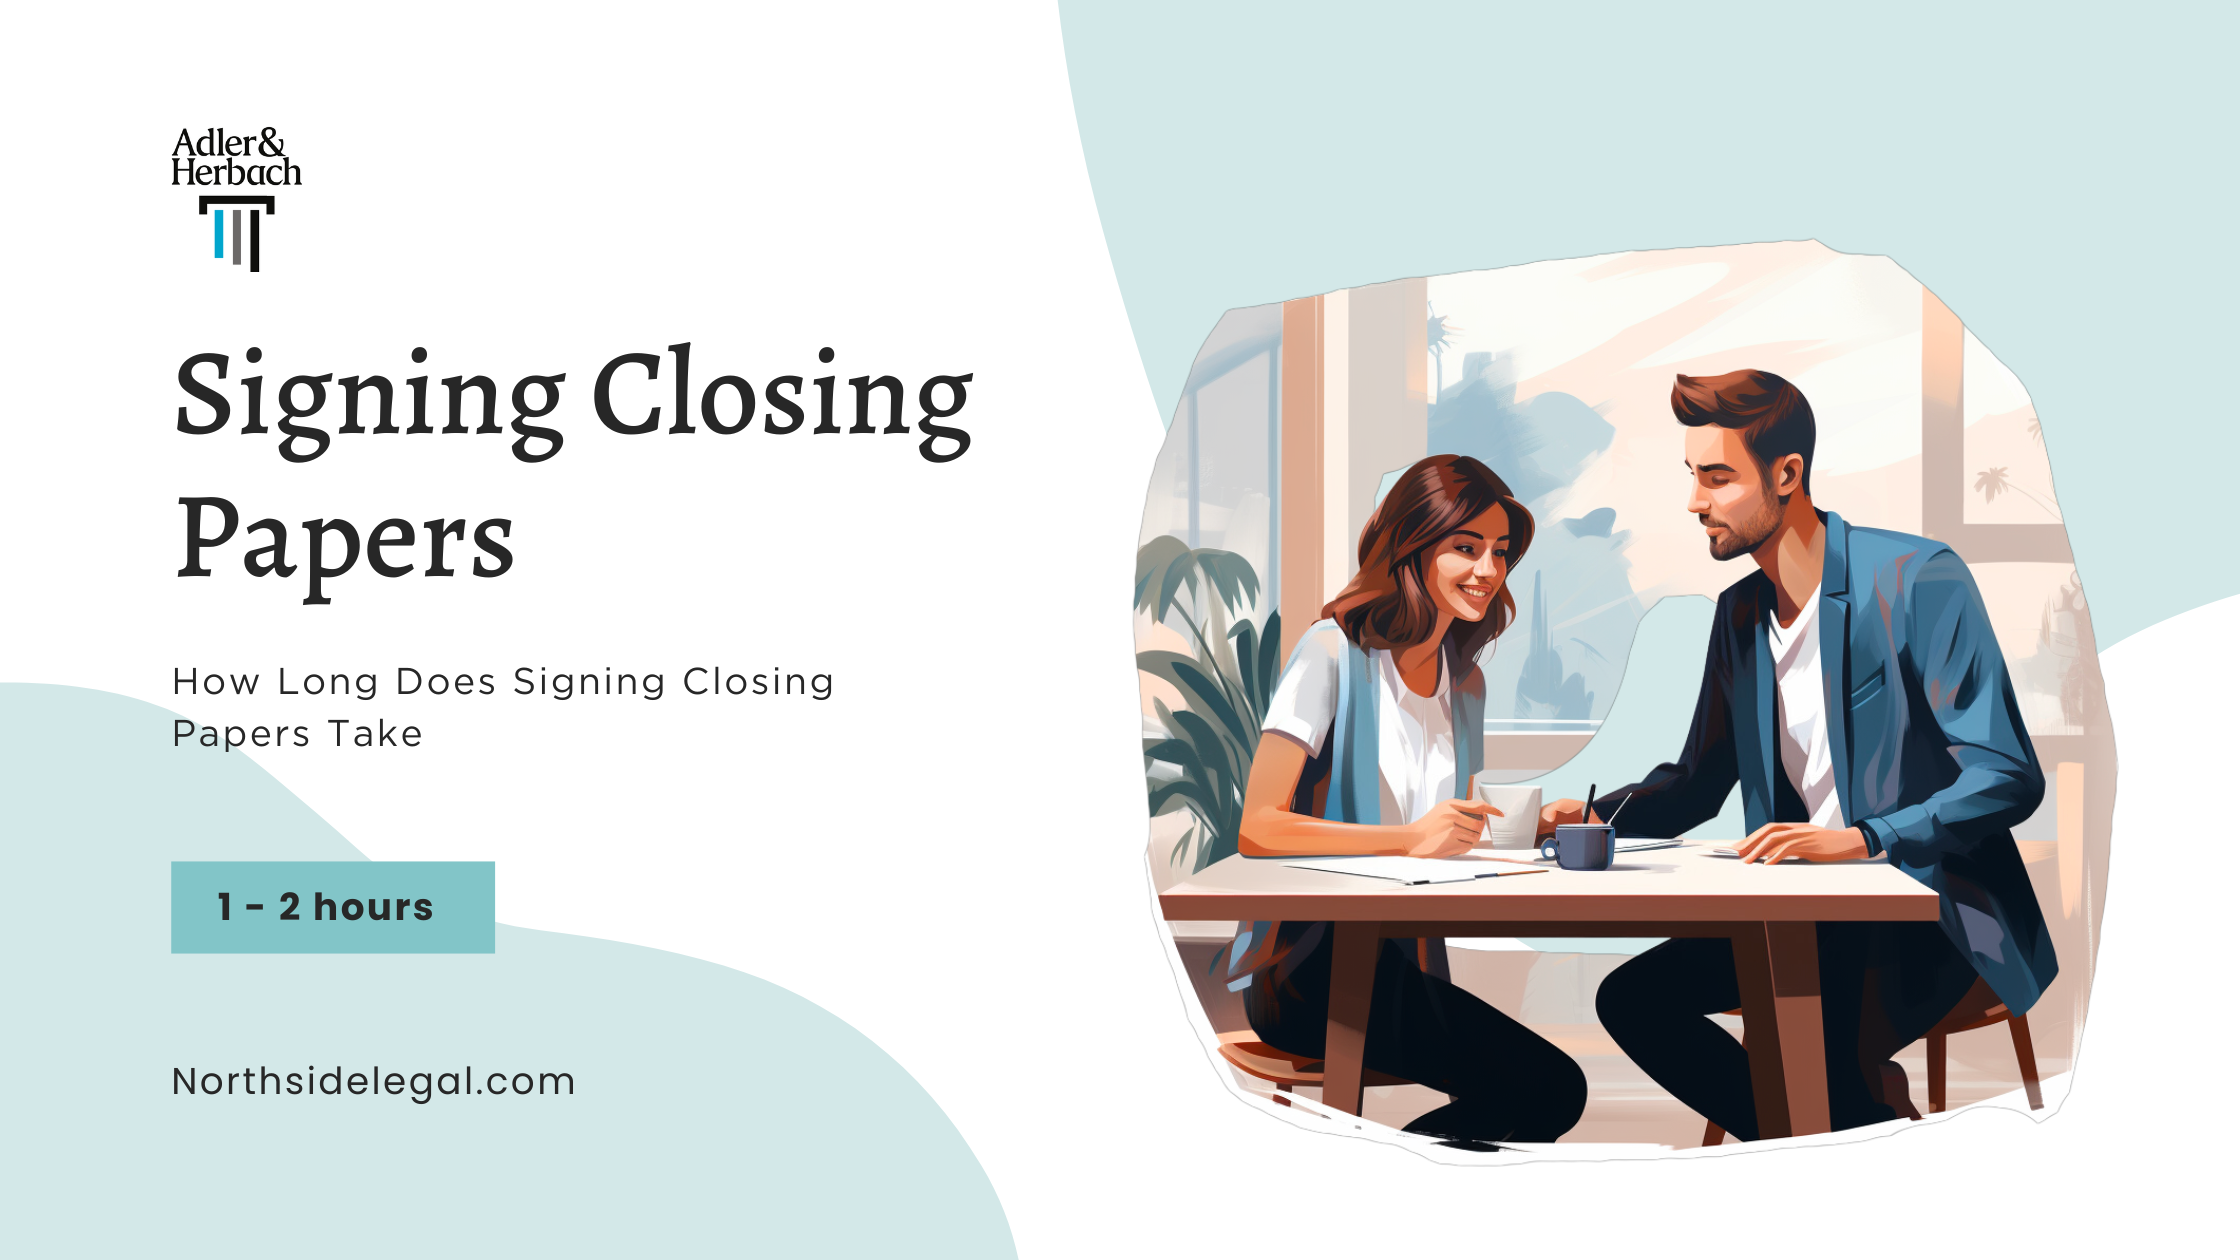 How Long Does Signing Closing Papers Take in Chicago?